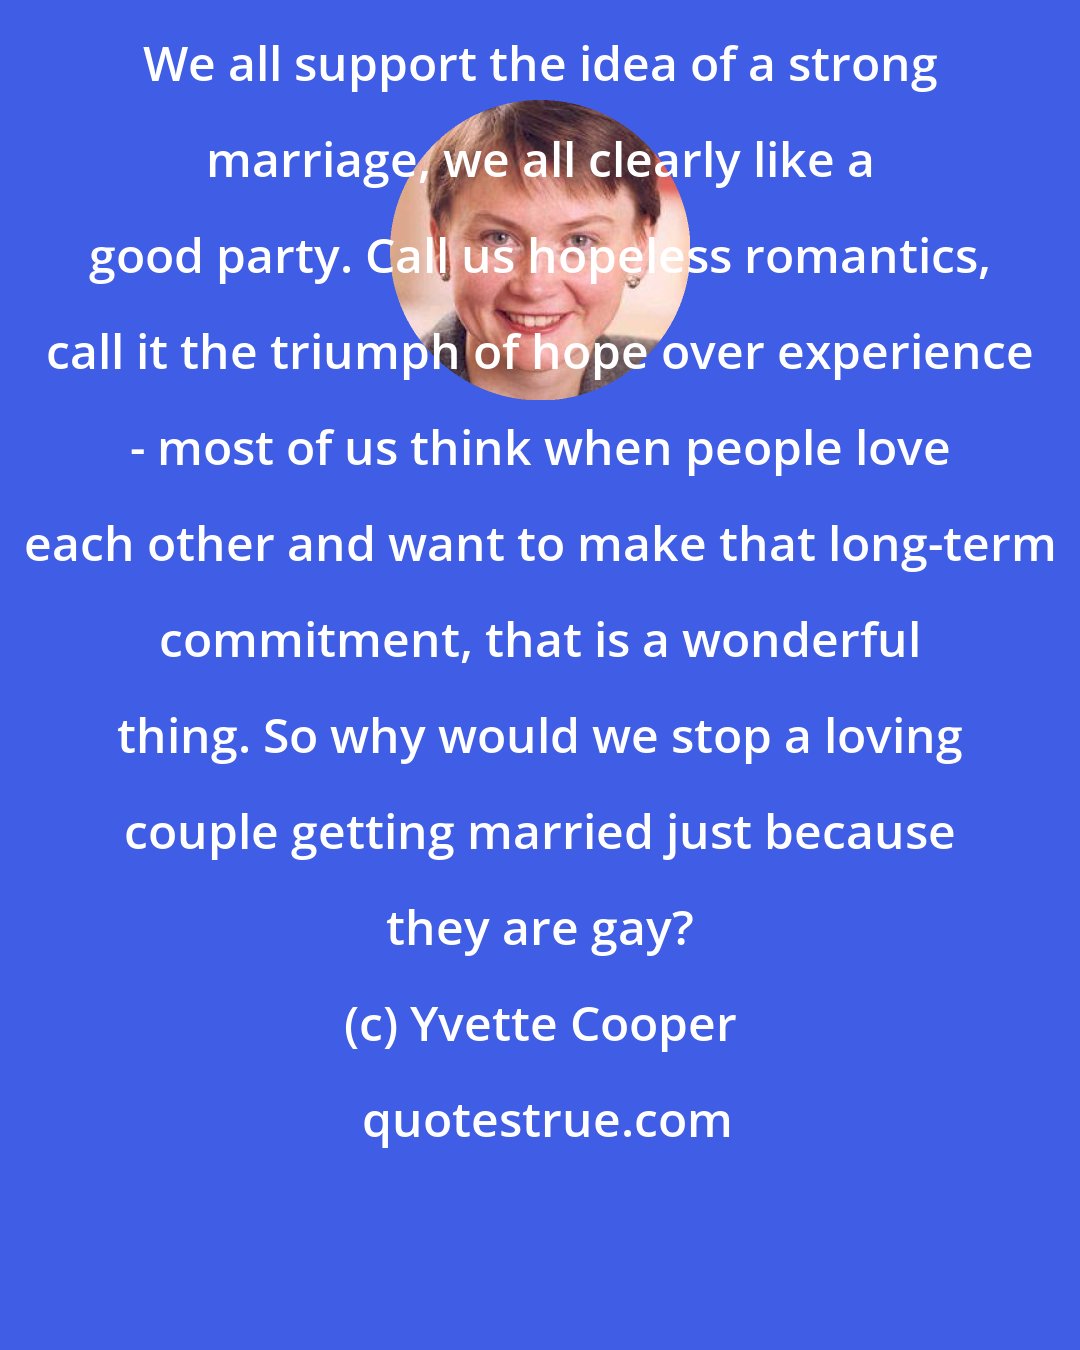 Yvette Cooper: We all support the idea of a strong marriage, we all clearly like a good party. Call us hopeless romantics, call it the triumph of hope over experience - most of us think when people love each other and want to make that long-term commitment, that is a wonderful thing. So why would we stop a loving couple getting married just because they are gay?